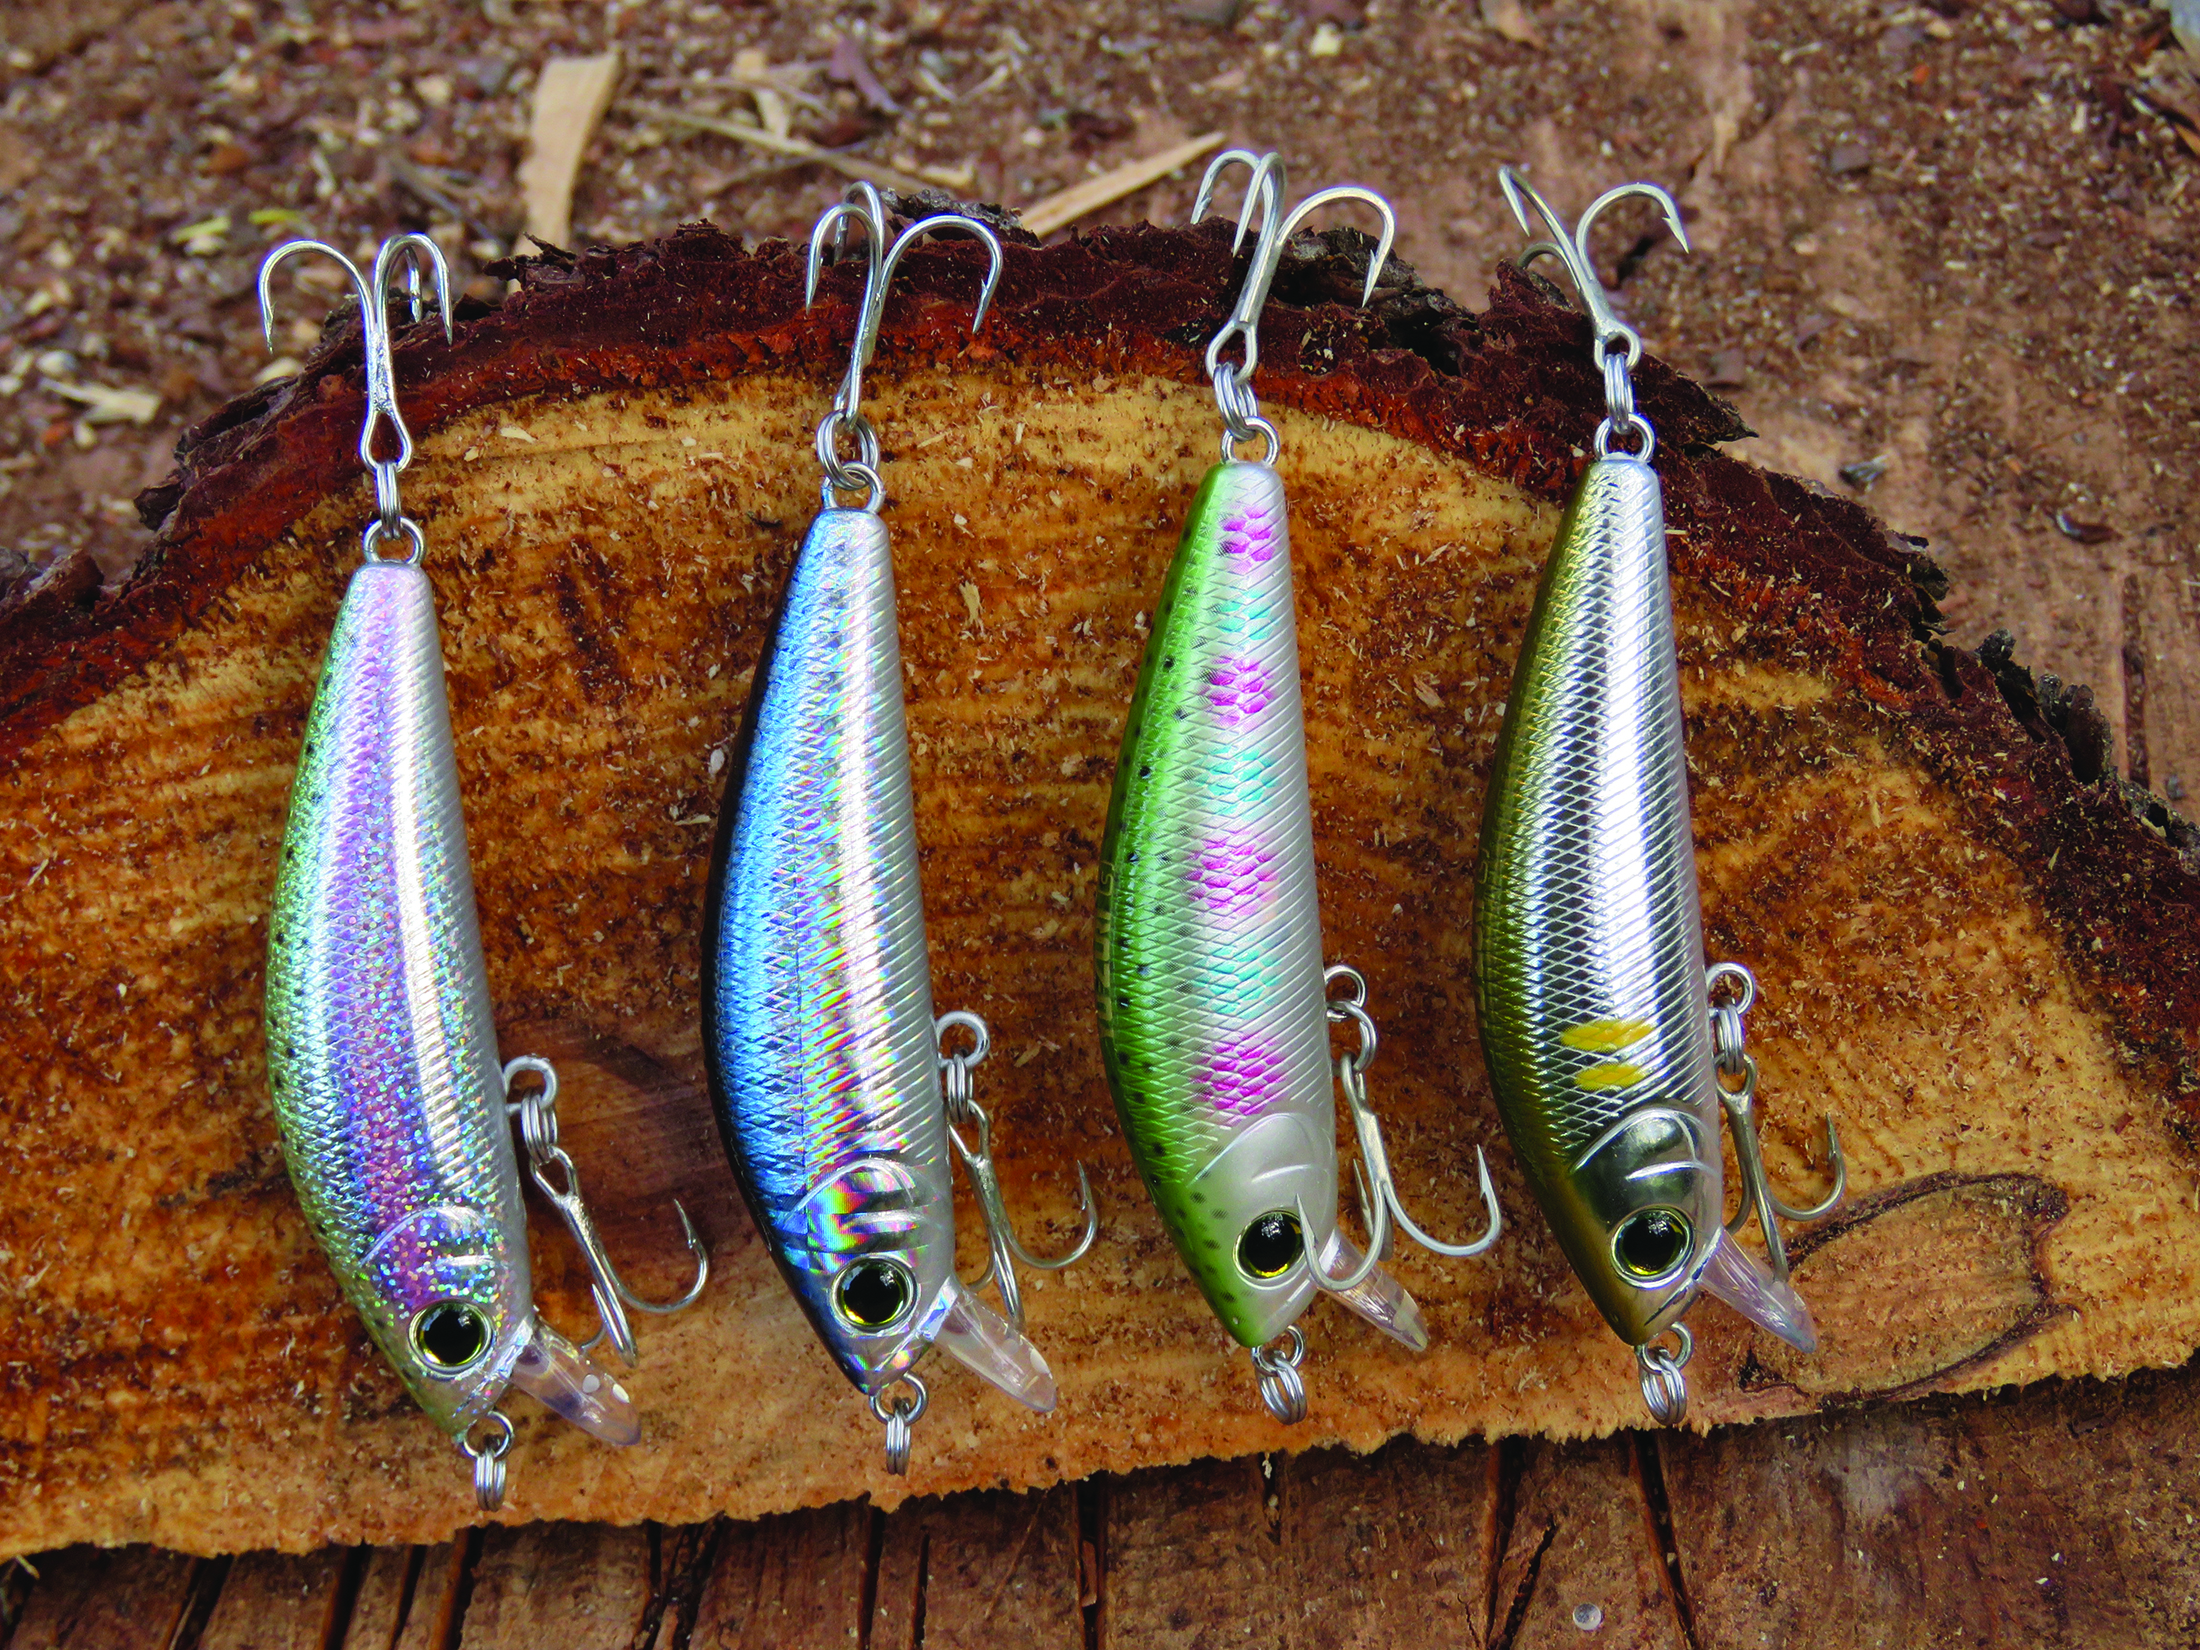 Plugging Tips For Spring Trout!